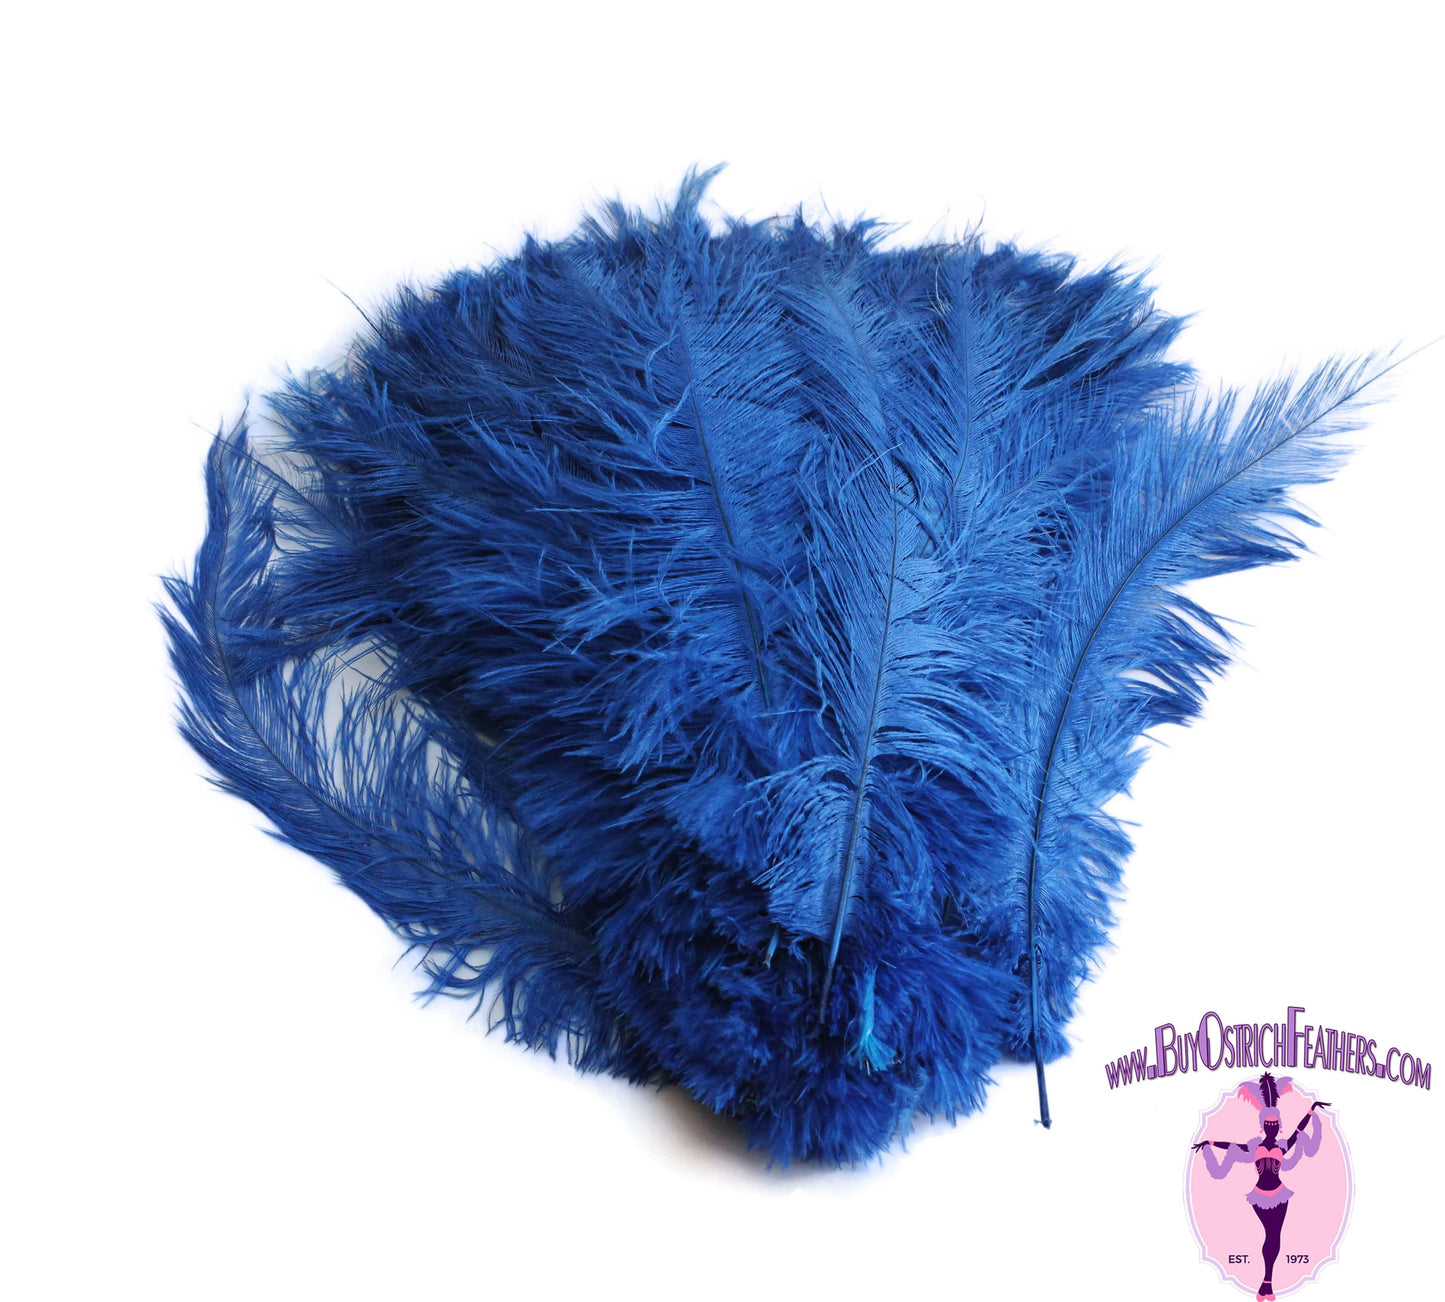 Ostrich Feather Spad Plumes 16-20" (Royal Blue) - Buy Ostrich Feathers